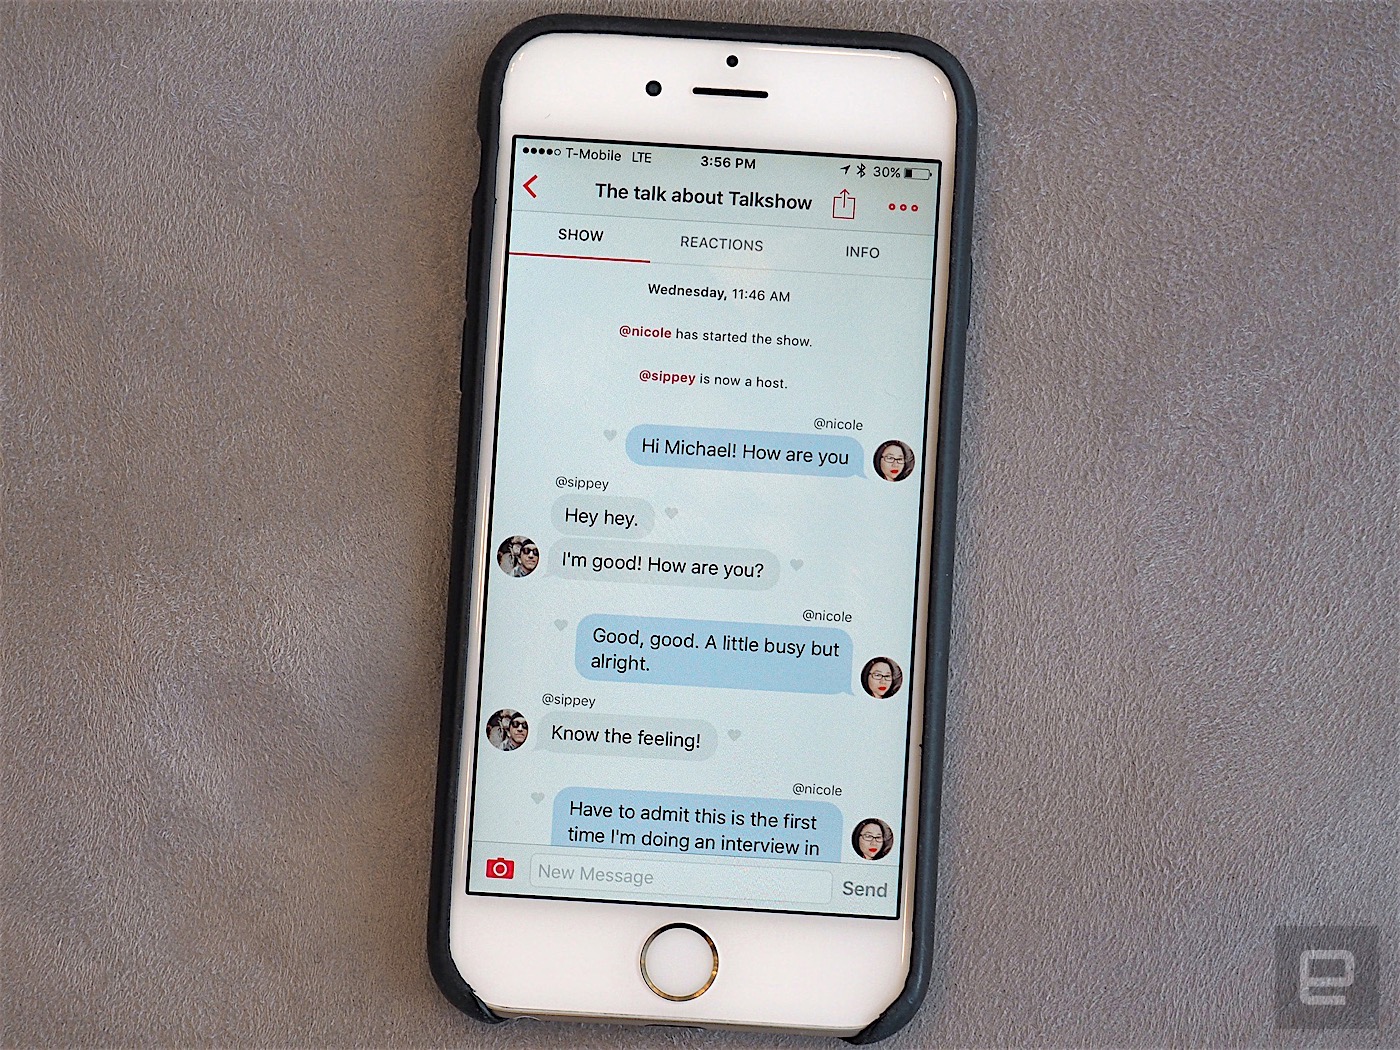 Talkshow is a messaging app that wants you to text in public